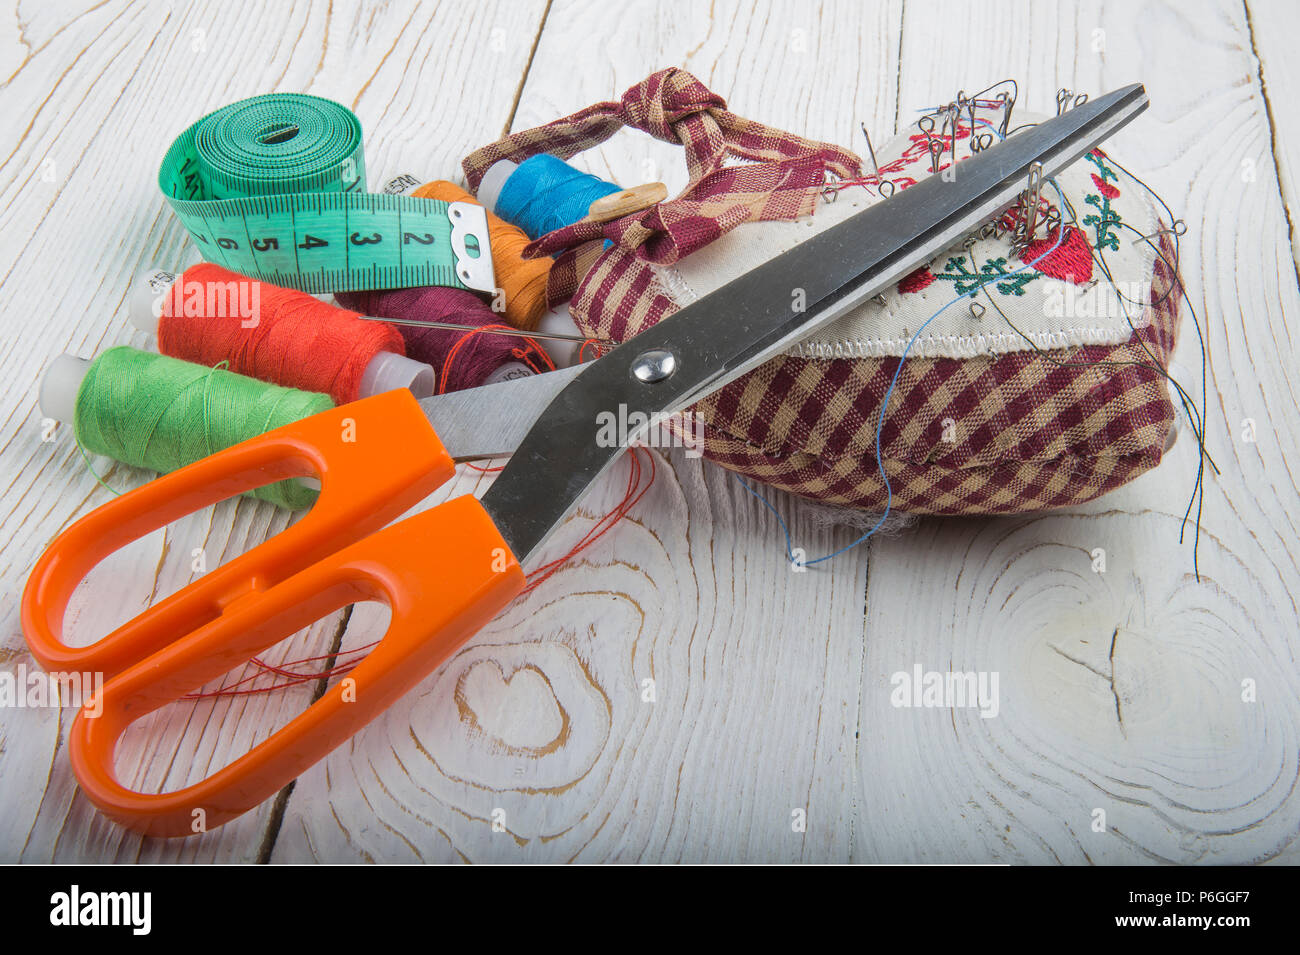 Tools for sewing- thread, scissors, pins Stock Photo